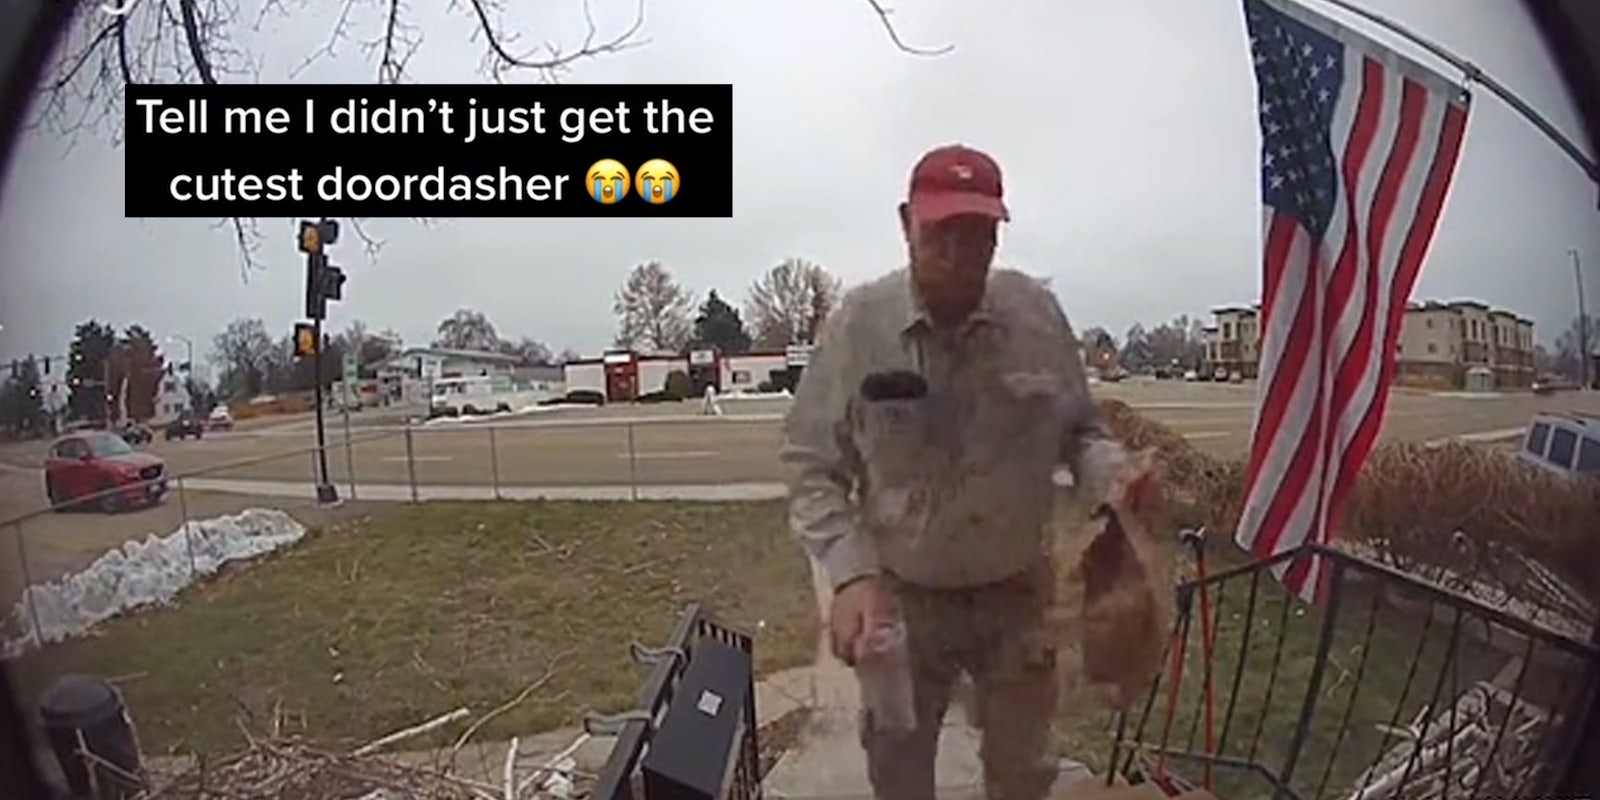 doordash employee delivers food with caption 'tell me i didn't just get the cutest doordasher'